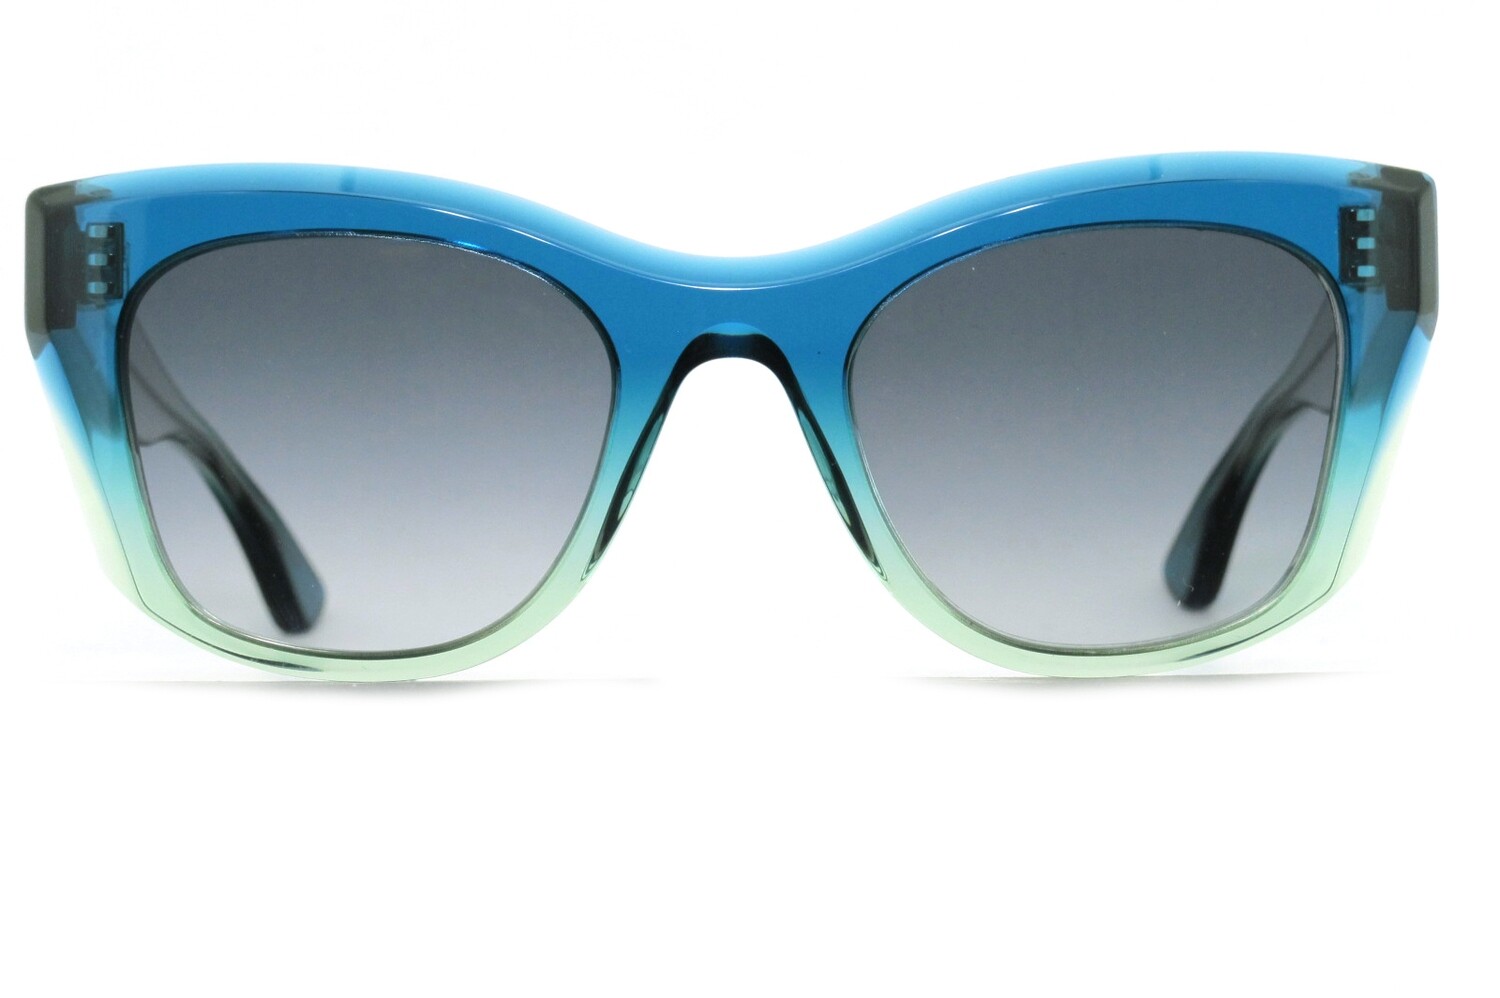 Prodigy by Thierry Lasry